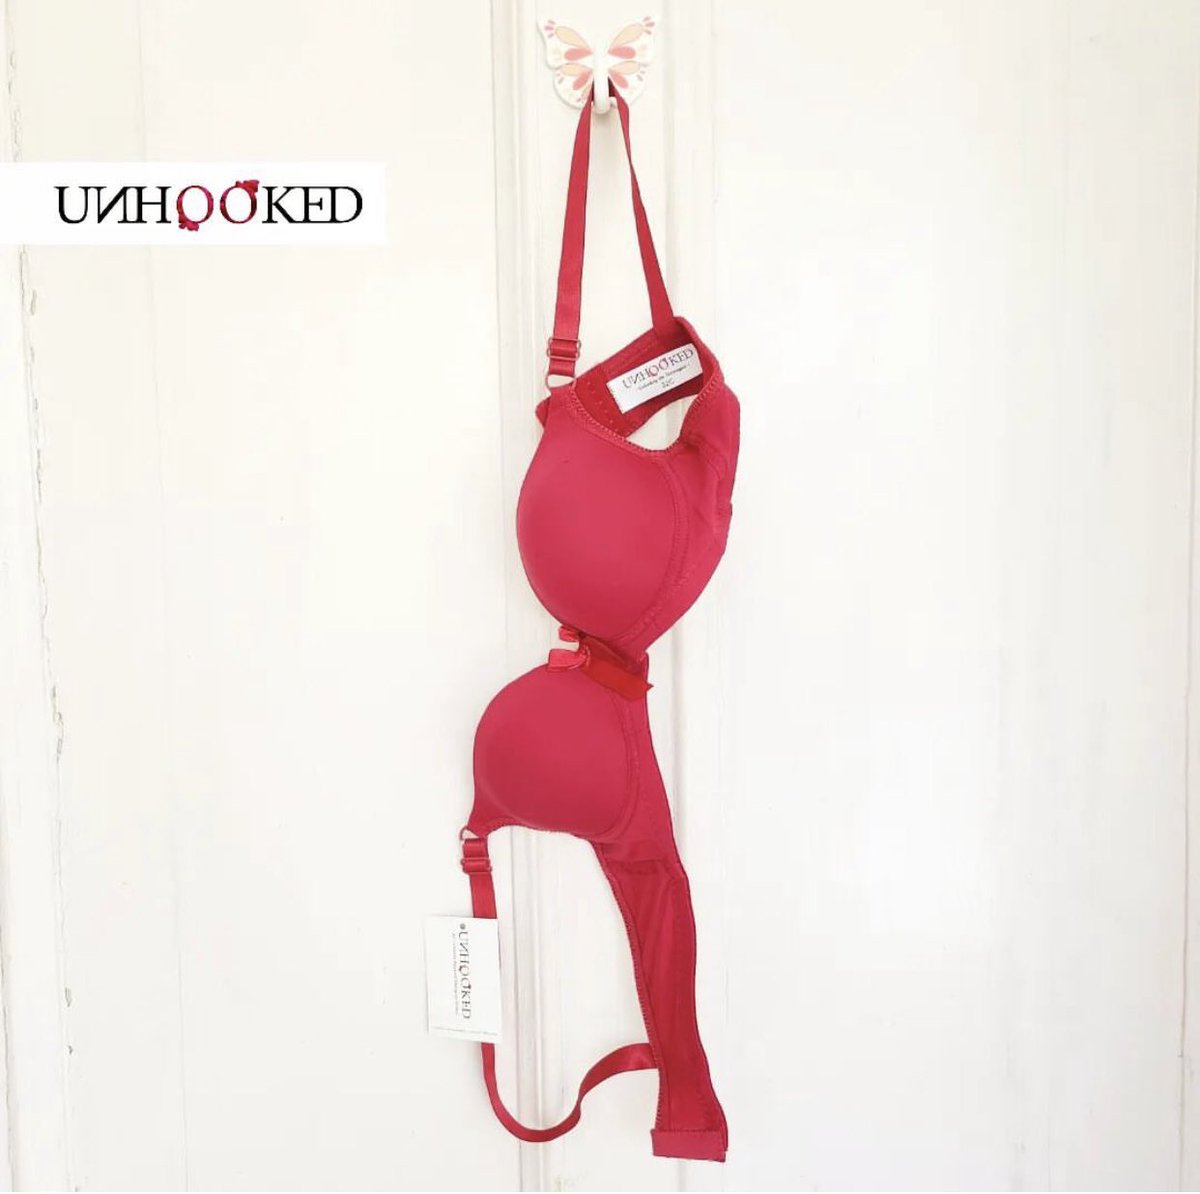 'Embrace your Confidence and let your Bra do the talking' 😉👙
🌹
🌹
🌹

#madeinindia #unhookedwoman #lingeriestore #comfort #dailywear #padded #comfort #cottonfabric #softfabric #designerwear #intimateapparels #unhookedwoman #satisfaction #love #designerlingerie #womenempowered